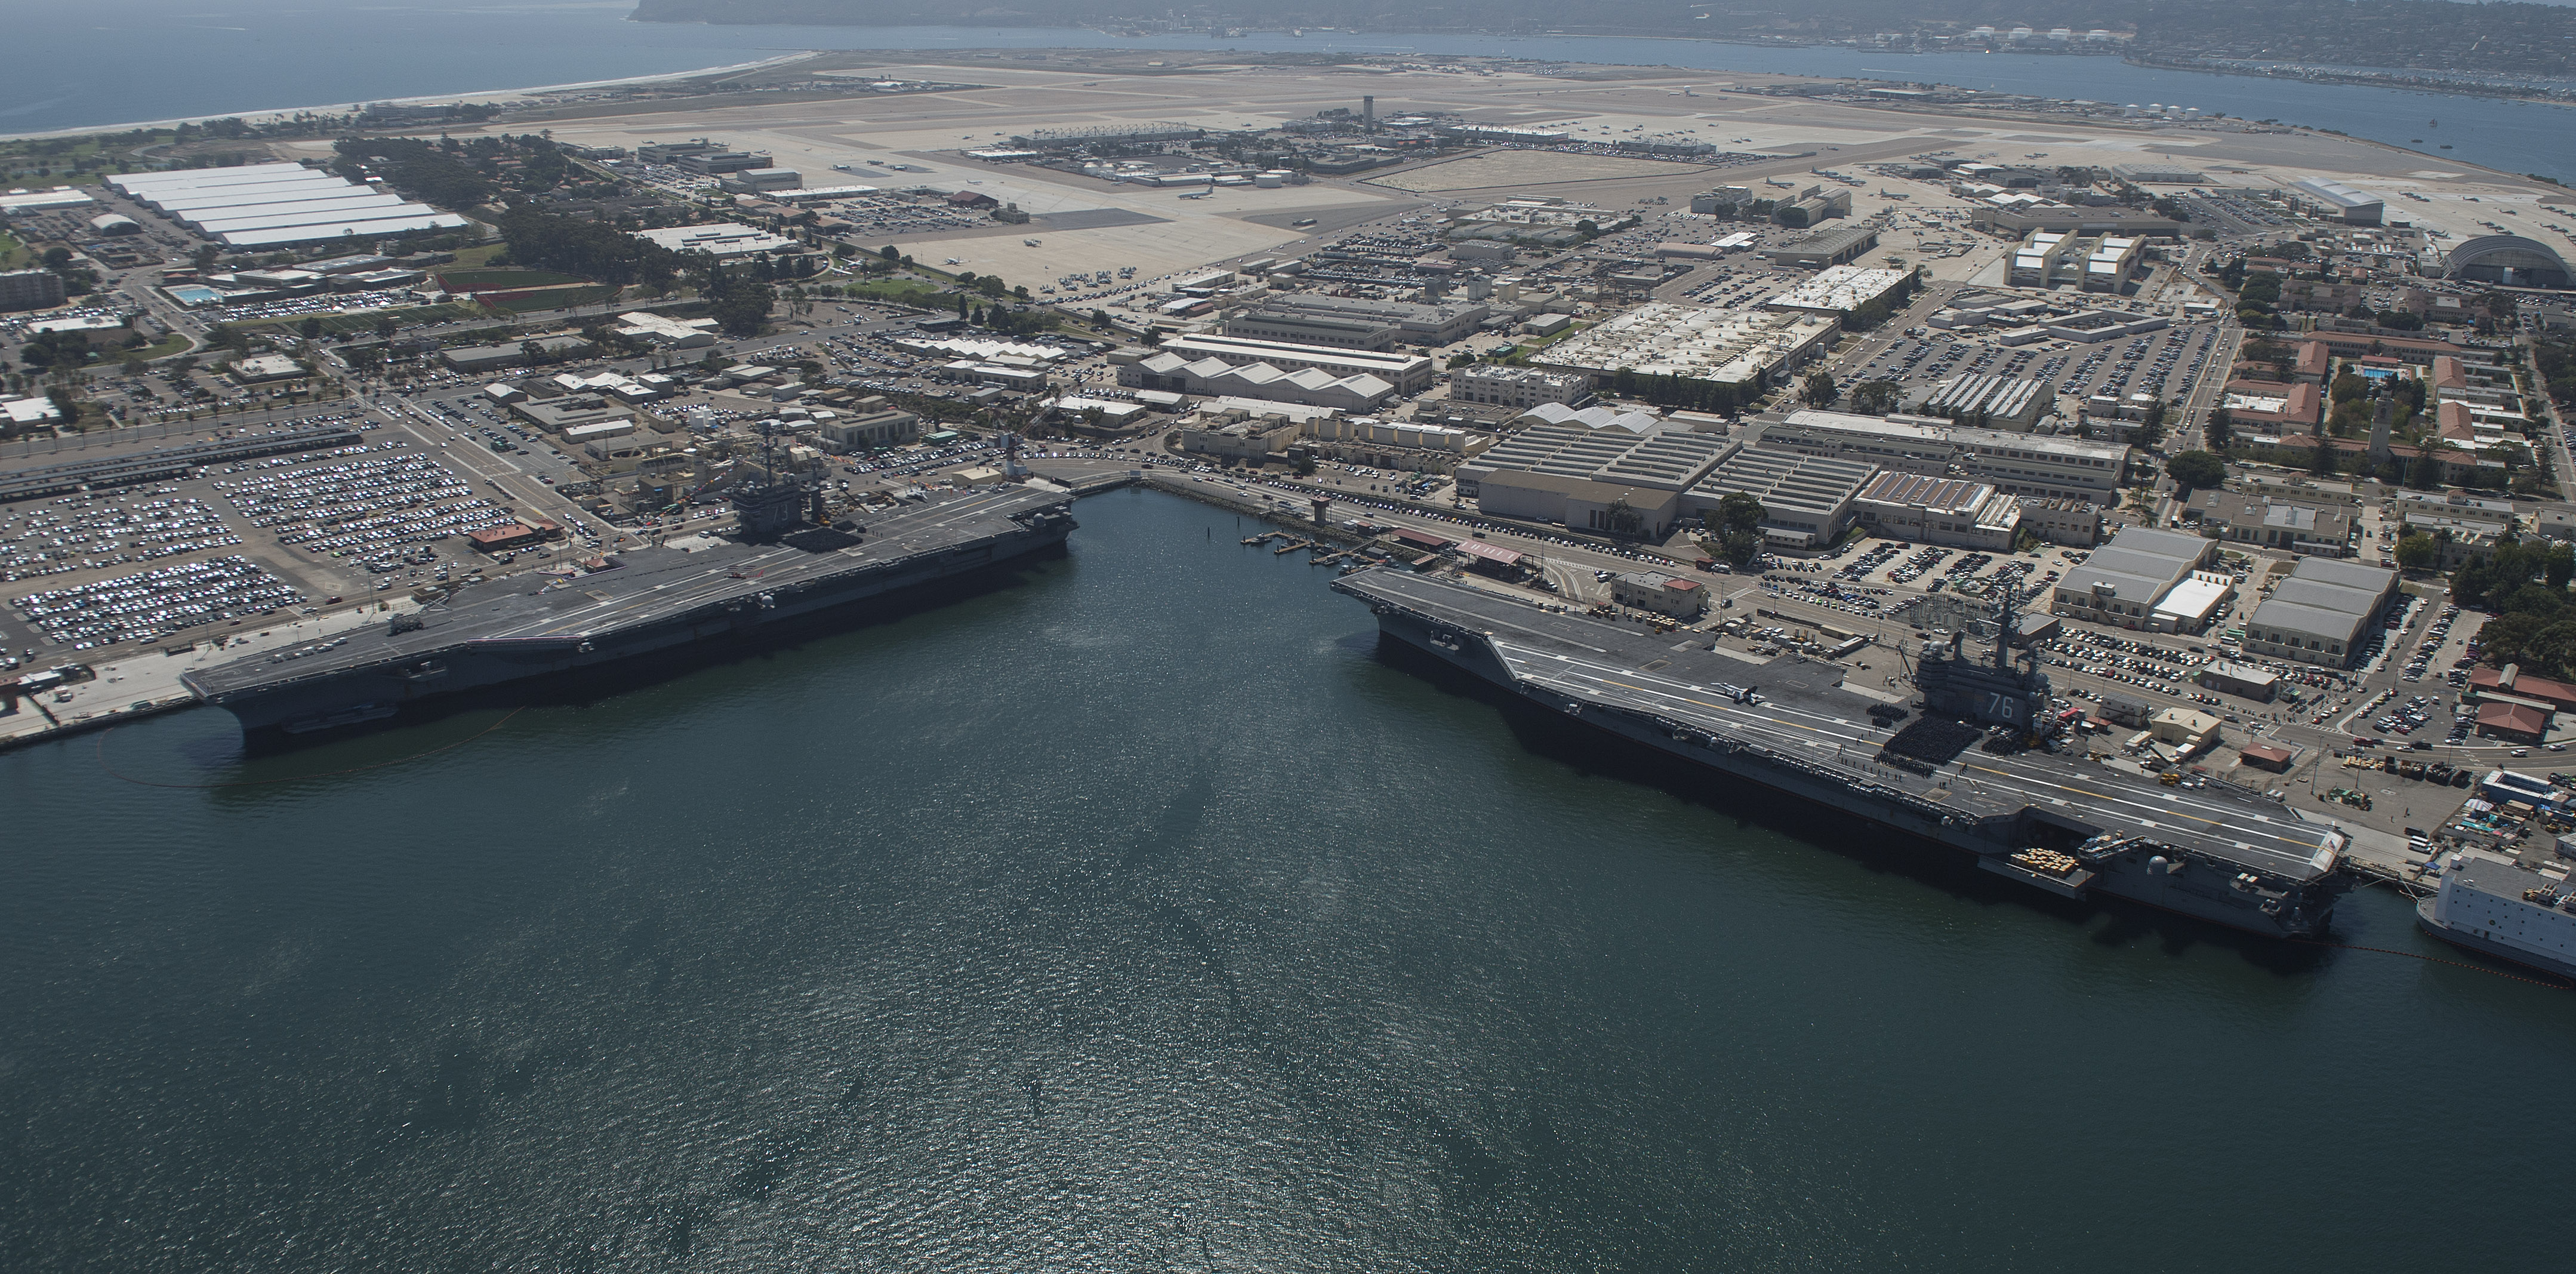 The Nimitz-class aircraft carriers USS George Washington (CVN 73) and USS Ronald Reagan (CVN 76) are pierside at Naval Air Station North Island while conducting a hull-swap on Aug. 18, 2015. US Navy photo.